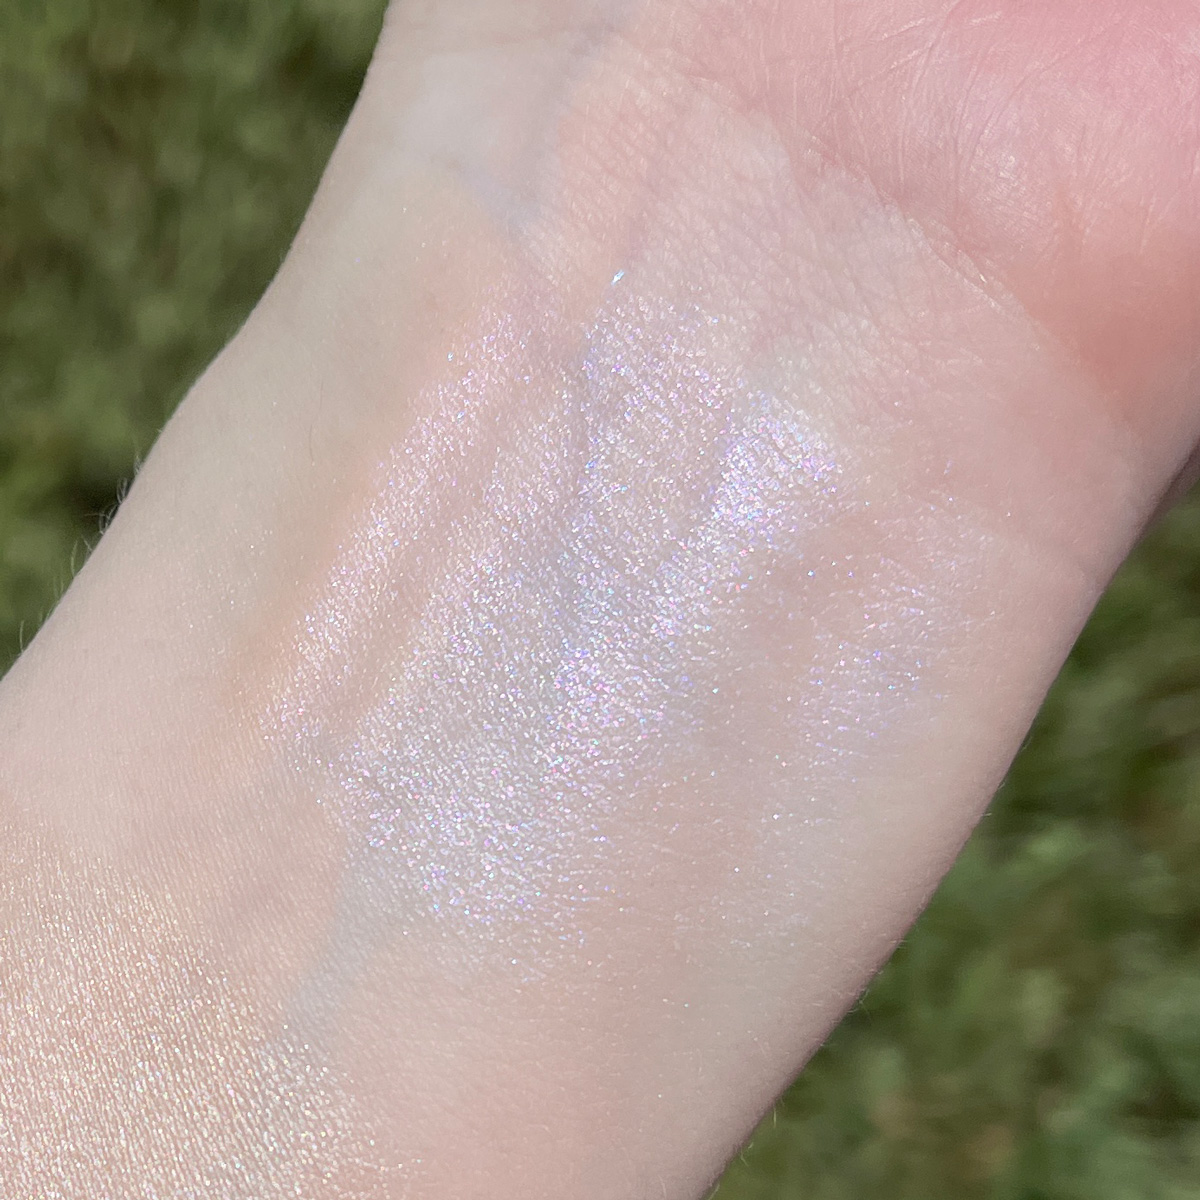 Lime Crime Wavy Skin Stick Swatched on fair skin